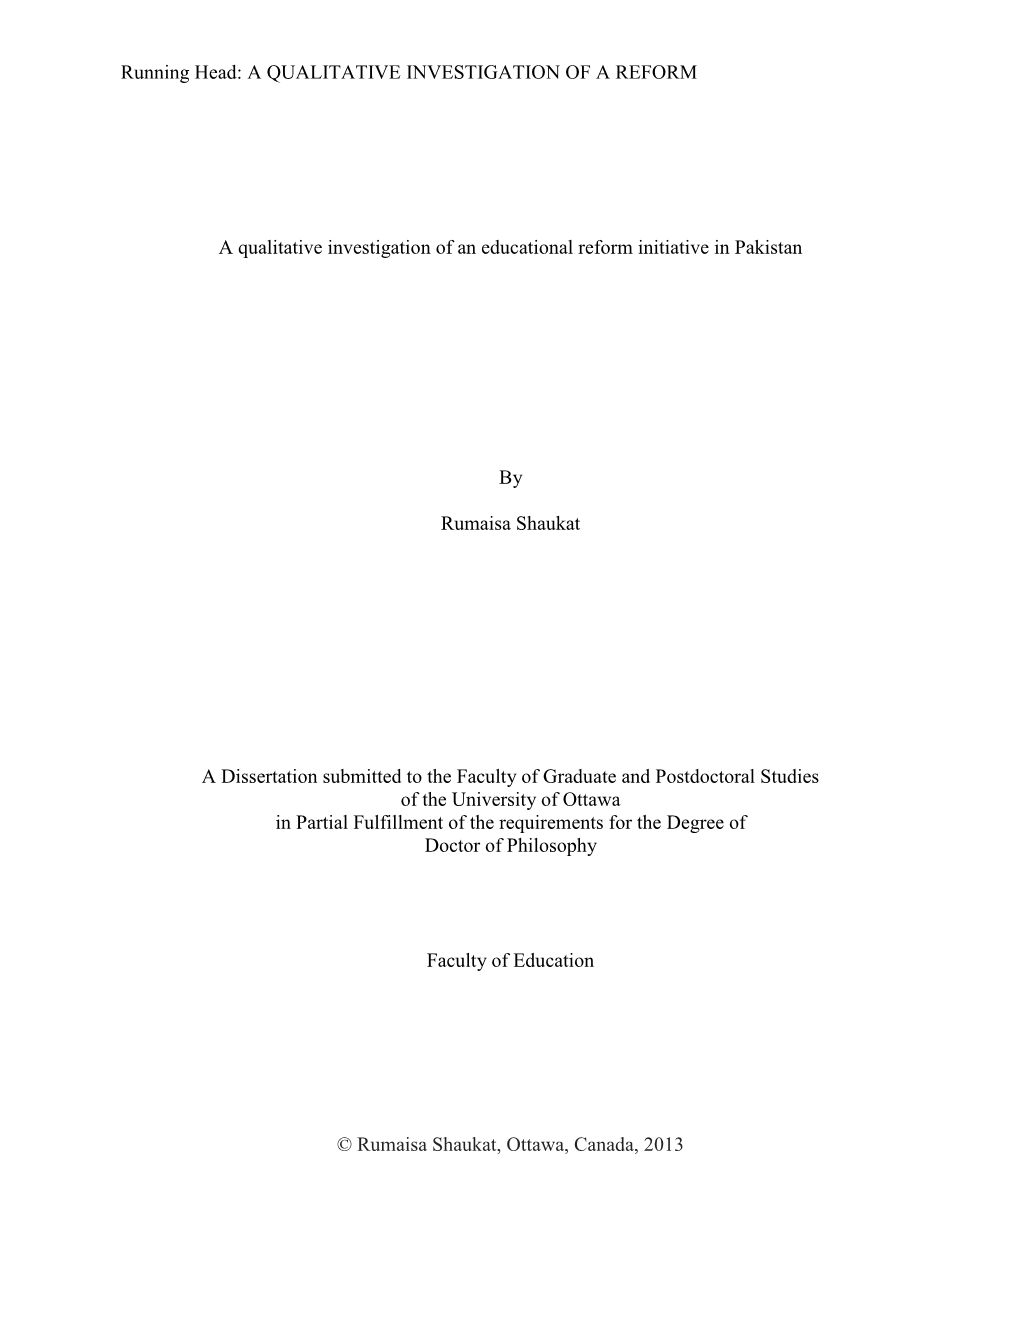 A Qualitative Investigation of an Educational Reform Initiative in Pakistan